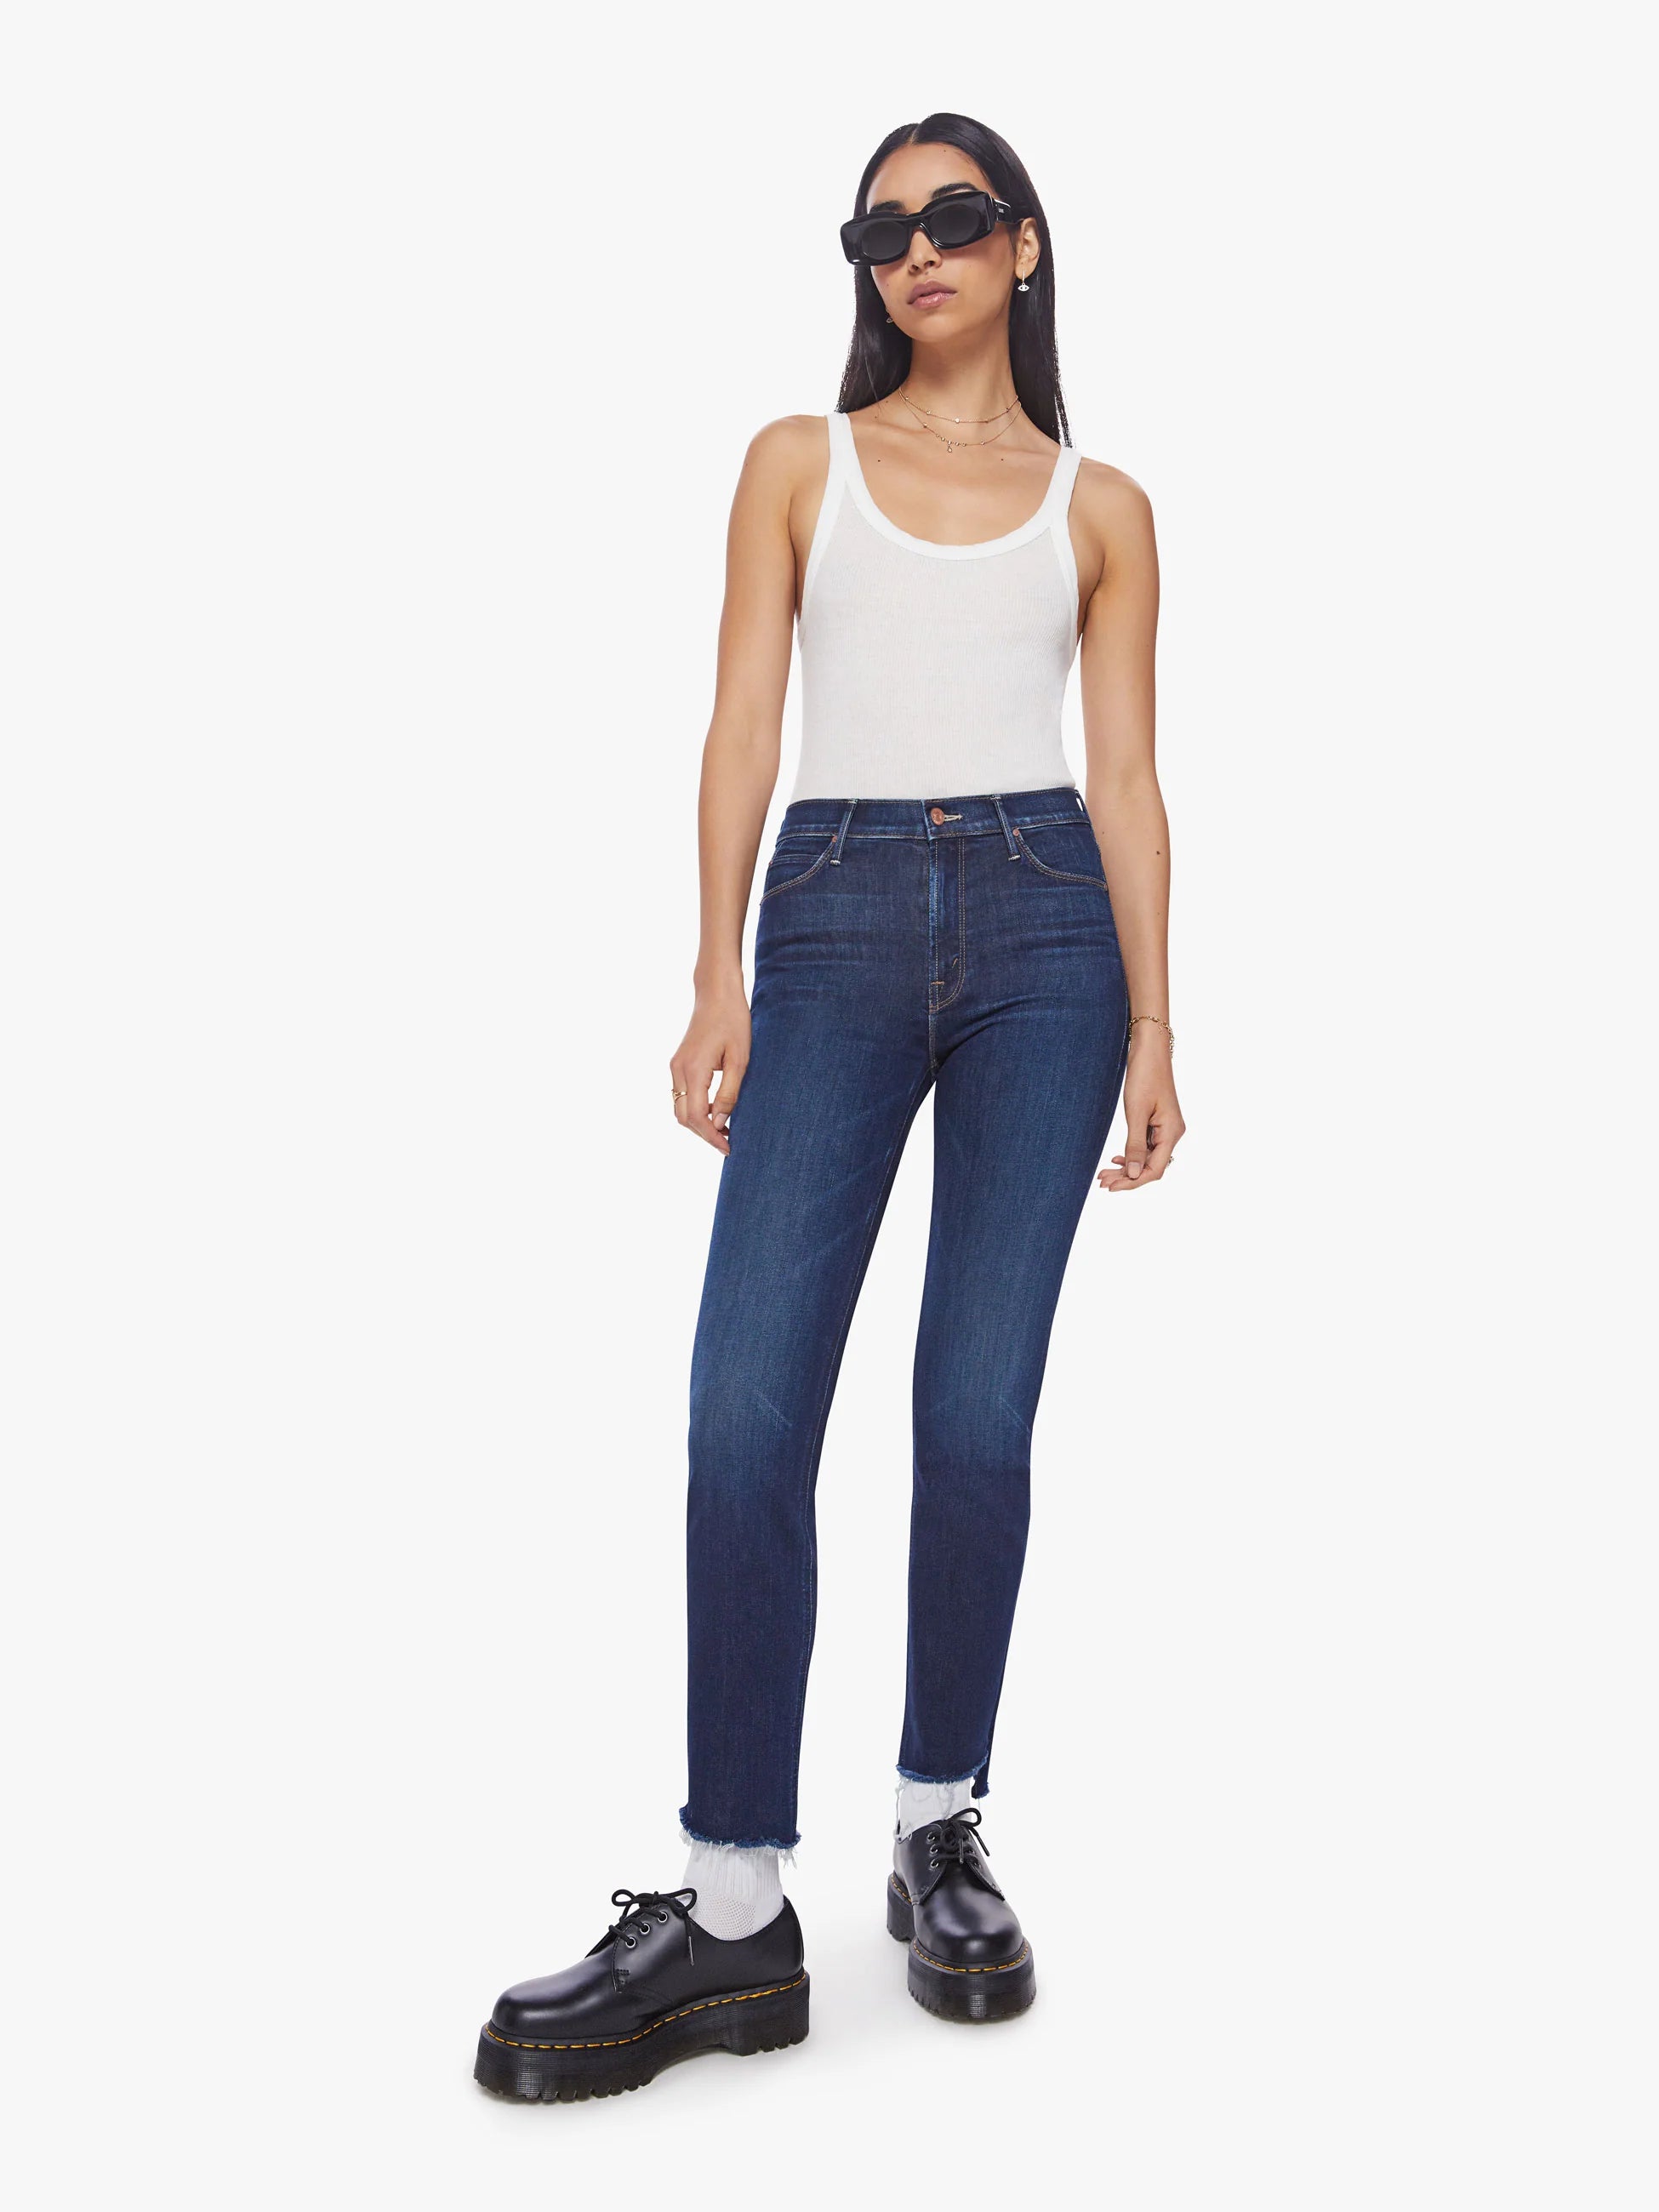 Out of bounds. Our most popular mid-rise jean has a straight leg with an ankle-length inseam and a frayed step hem. Made from stretch denim, Off Limits is a dark-blue wash with subtle fading and whiskering. Mid Rise Dazzler